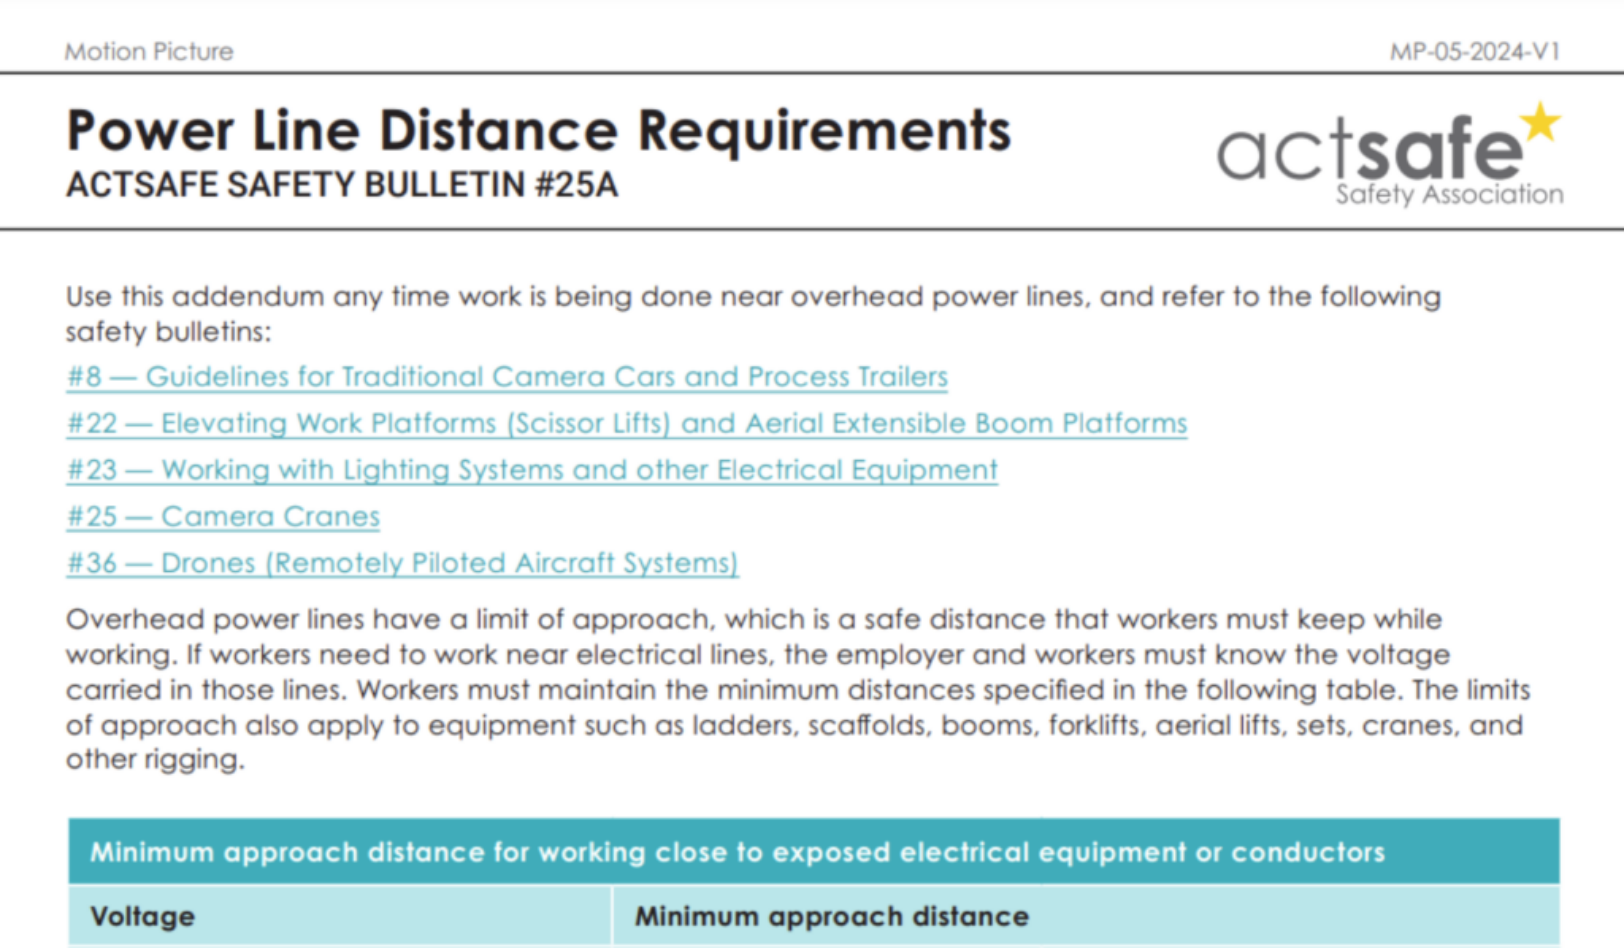 Power Line Distance Requirements Safety Bulletin – Motion Picture